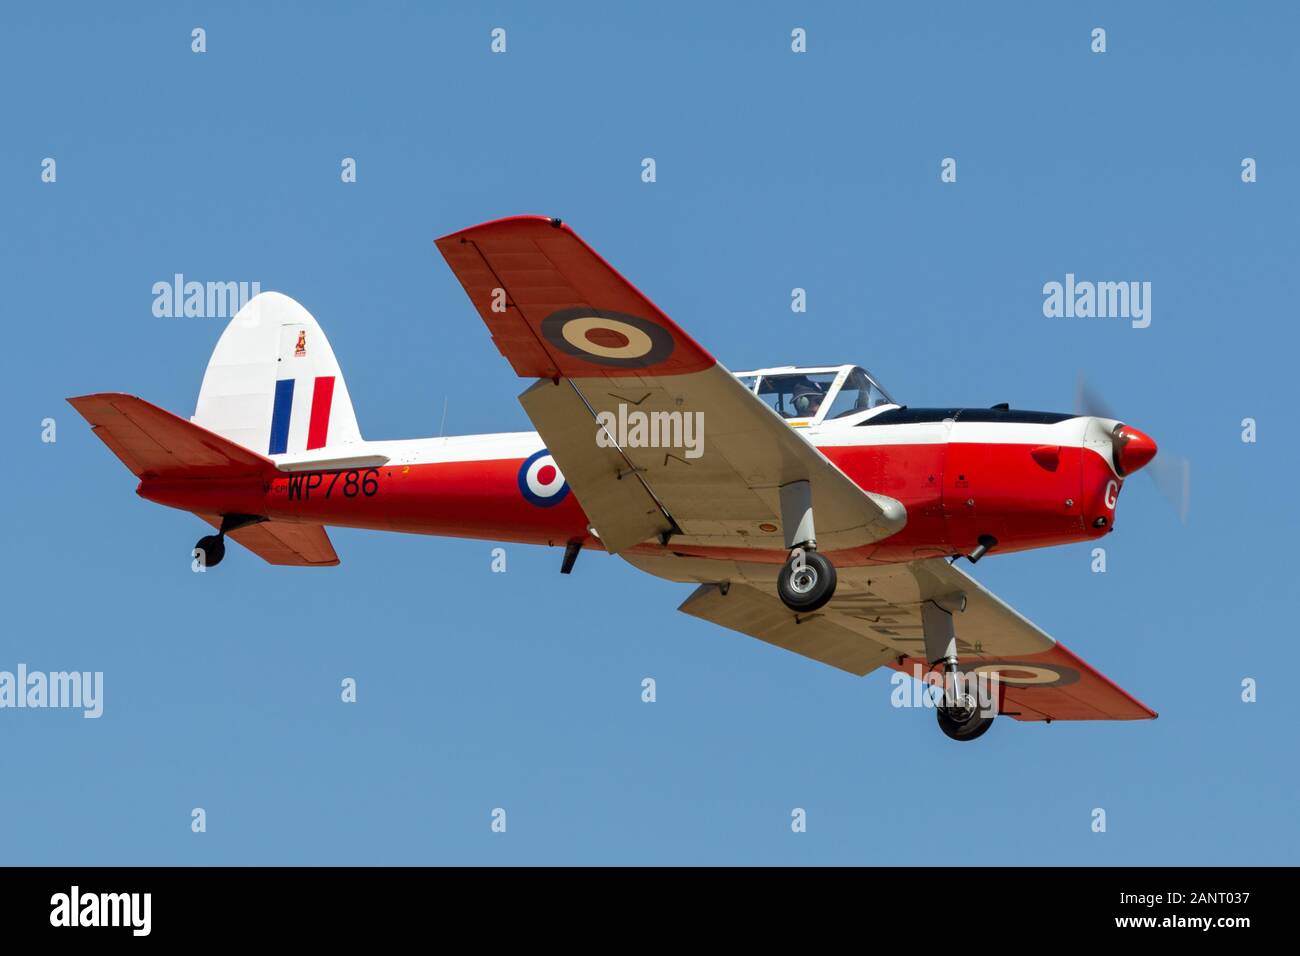 De Havilland Canada DHC-1 T Chipmunk training aircraft formerly used by the Royal Air Force (RAF) to train military pilots. Stock Photo